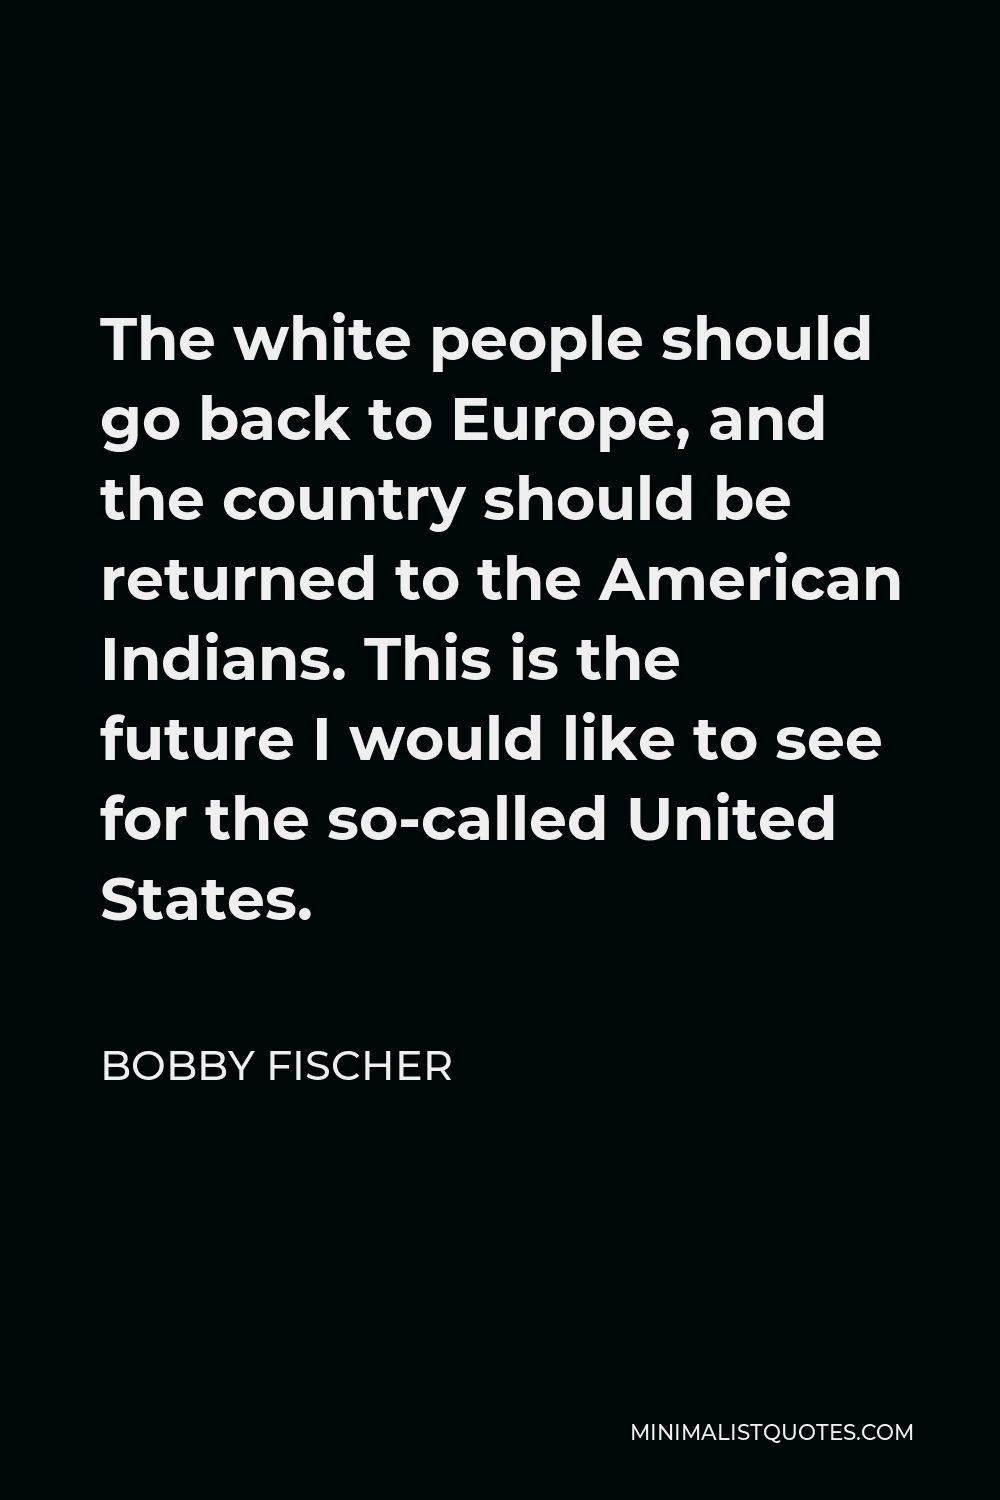 Bobby Fischer Quote - The white people should go back to Europe, and the country should be returned to the American Indians. This is the future I would like to see for the so-called United States.